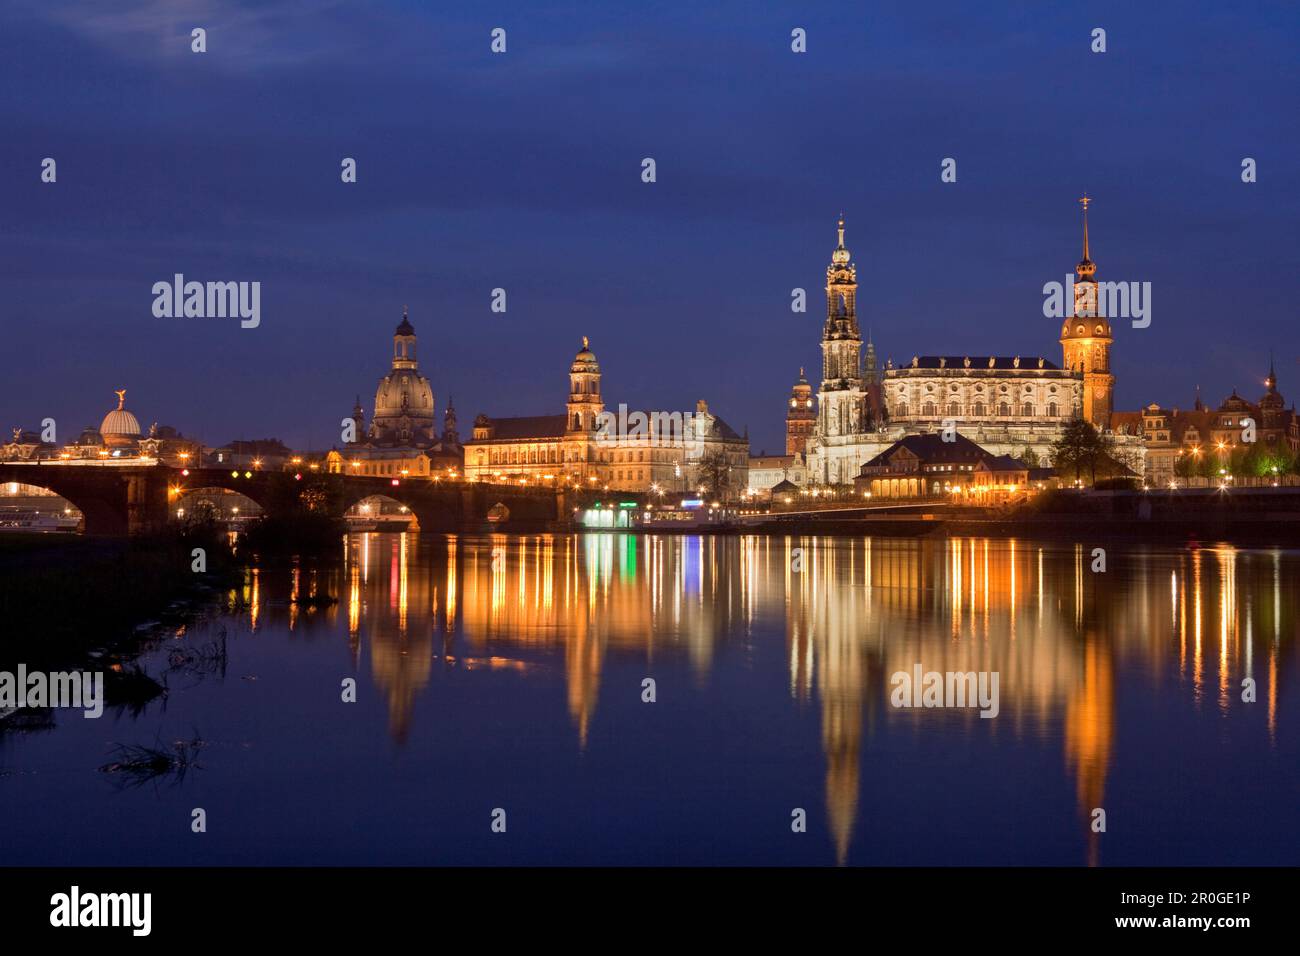 City view with Elbe River, Augustus Bridge, Lipsius building, Frauenkirche, Church of our Lady, Ständehaus, town hall tower, Hofkirche and Hausmannstu Stock Photo